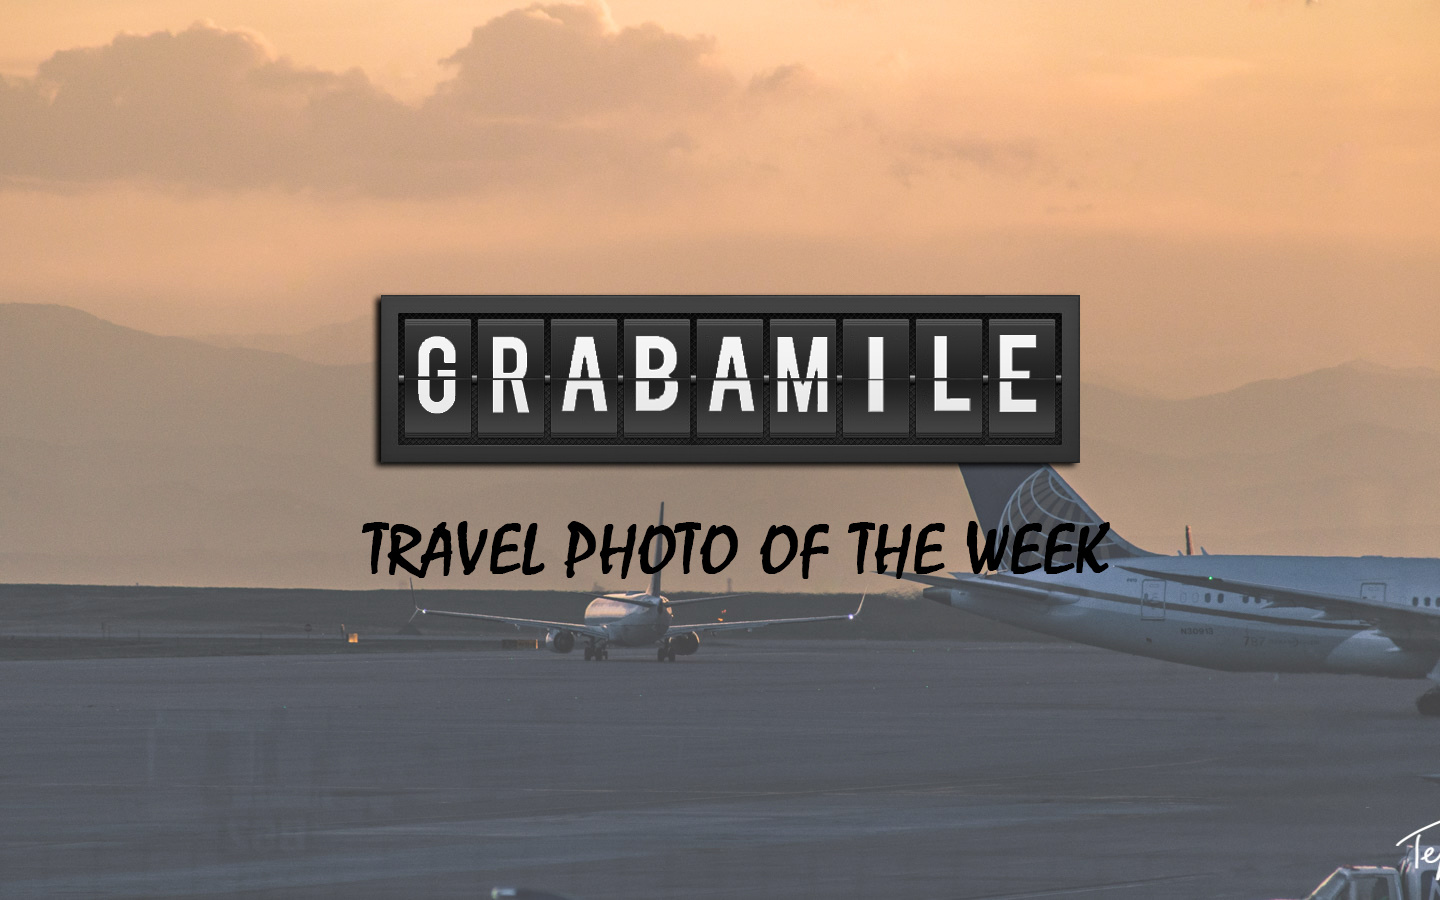 Travel Photo of the Week: The Most Picturesque Major Airport?